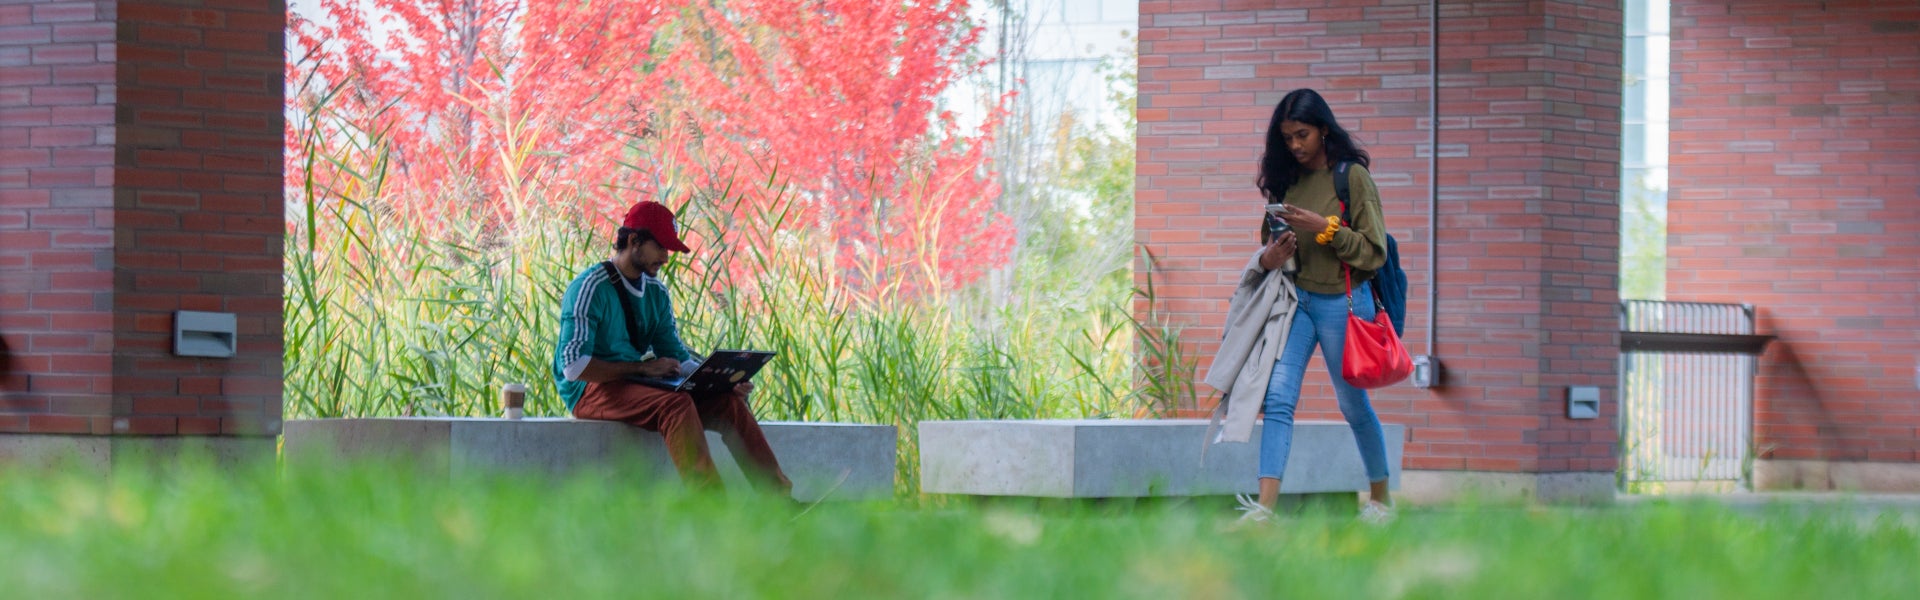 Students in Polonsky commons